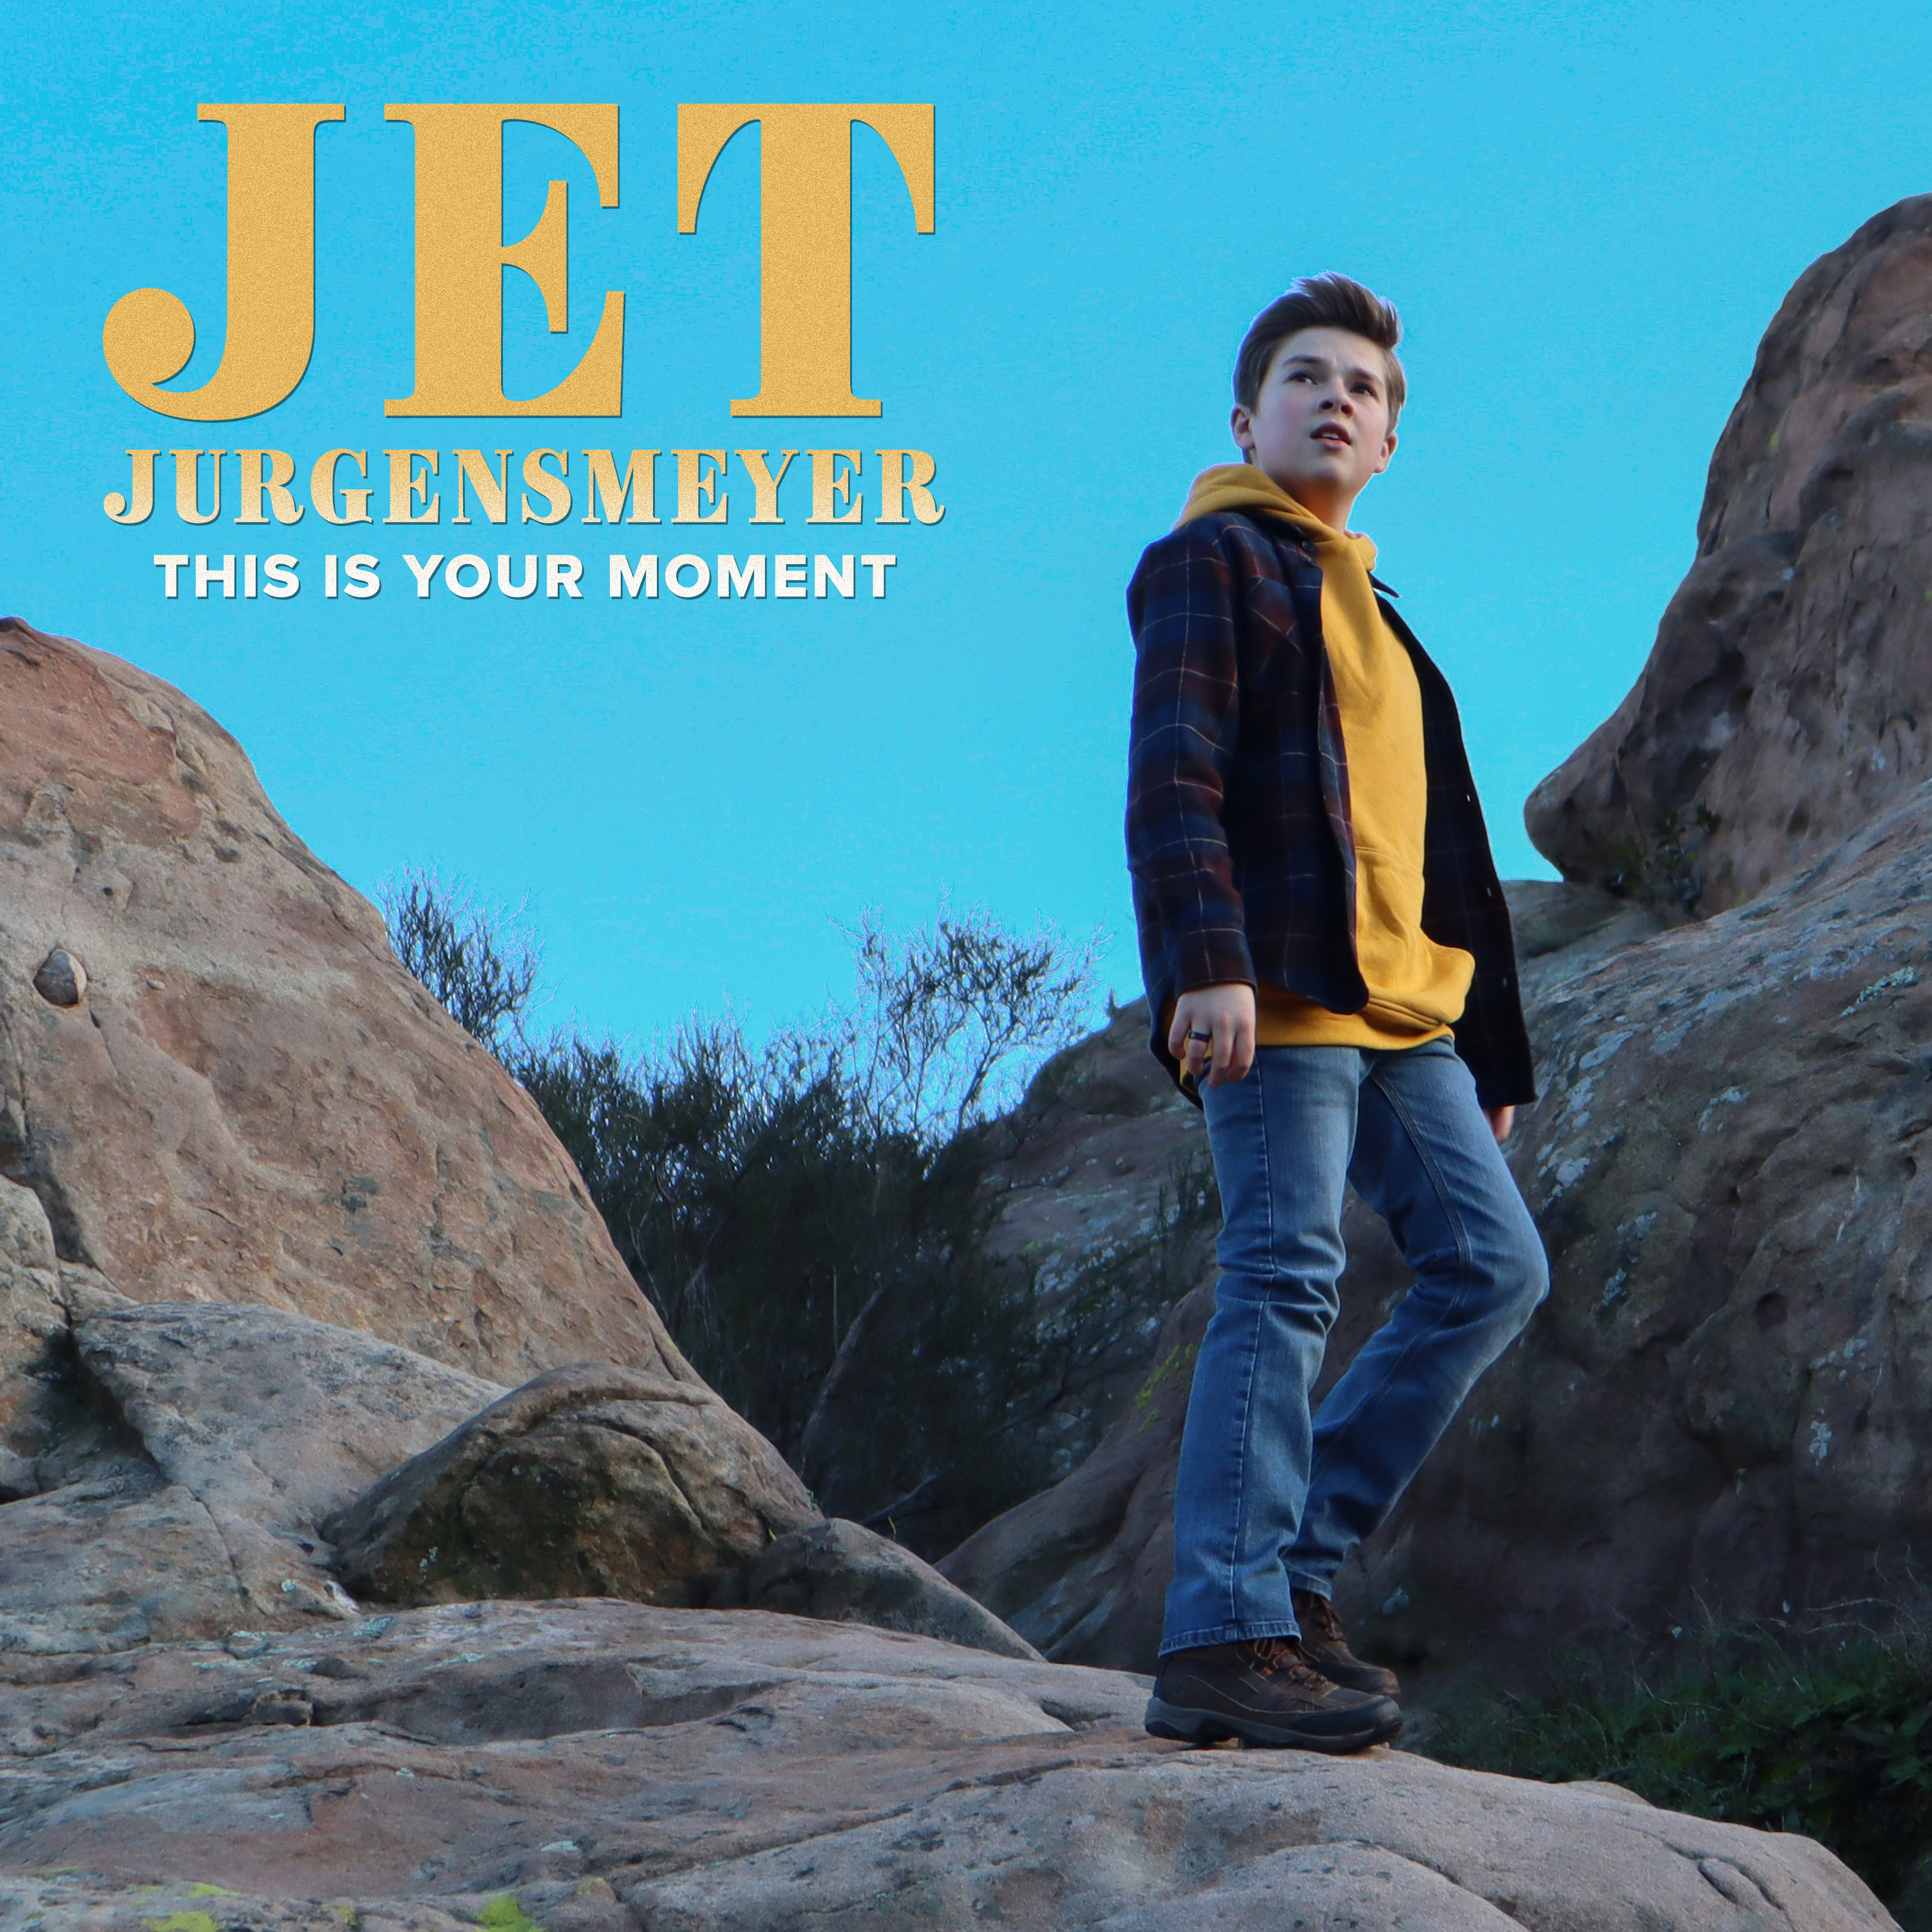 Jet Jurgensmeyer Hopes To Inspire with New Track “This Is Your Moment” – Listen